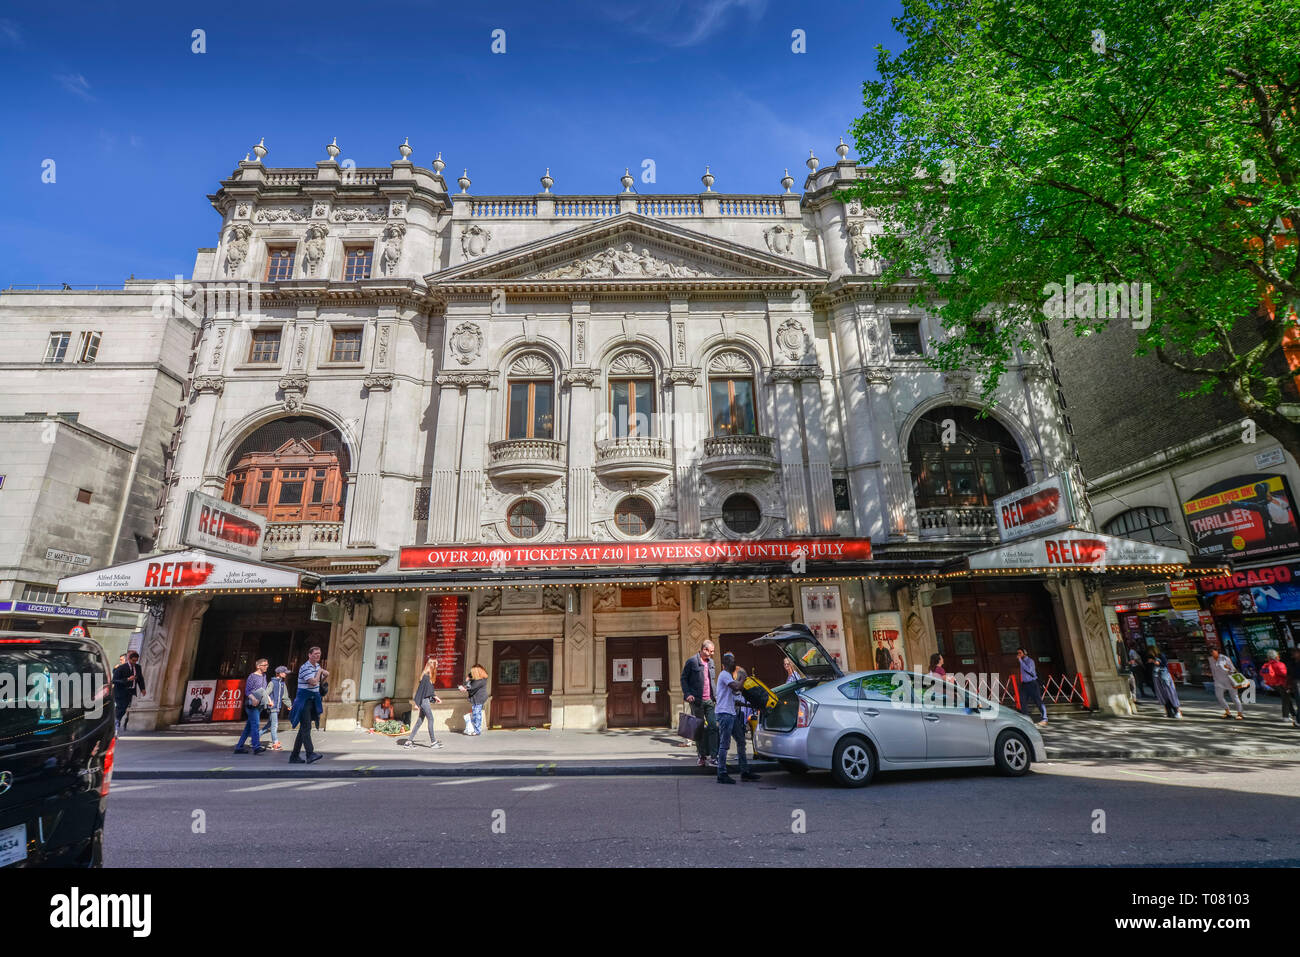 Wyndham's Theatre, Charing Cross Rd, Leicester Square, Londra, Inghilterra, Grossbritannien Foto Stock